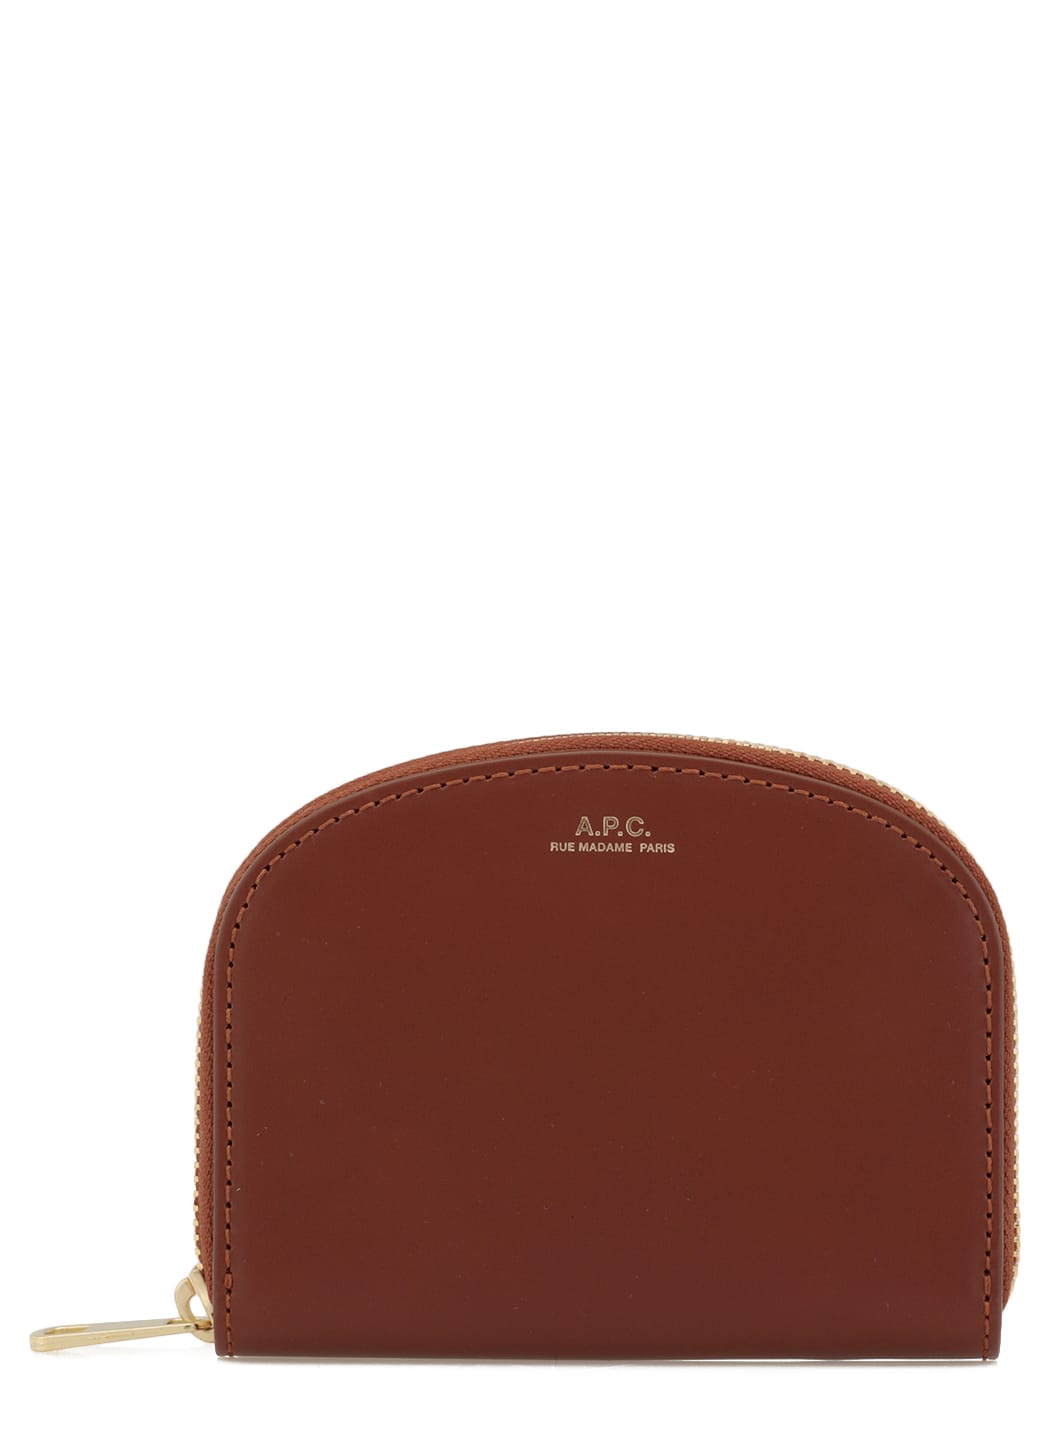 Apc Leather Card Holder In Noisette